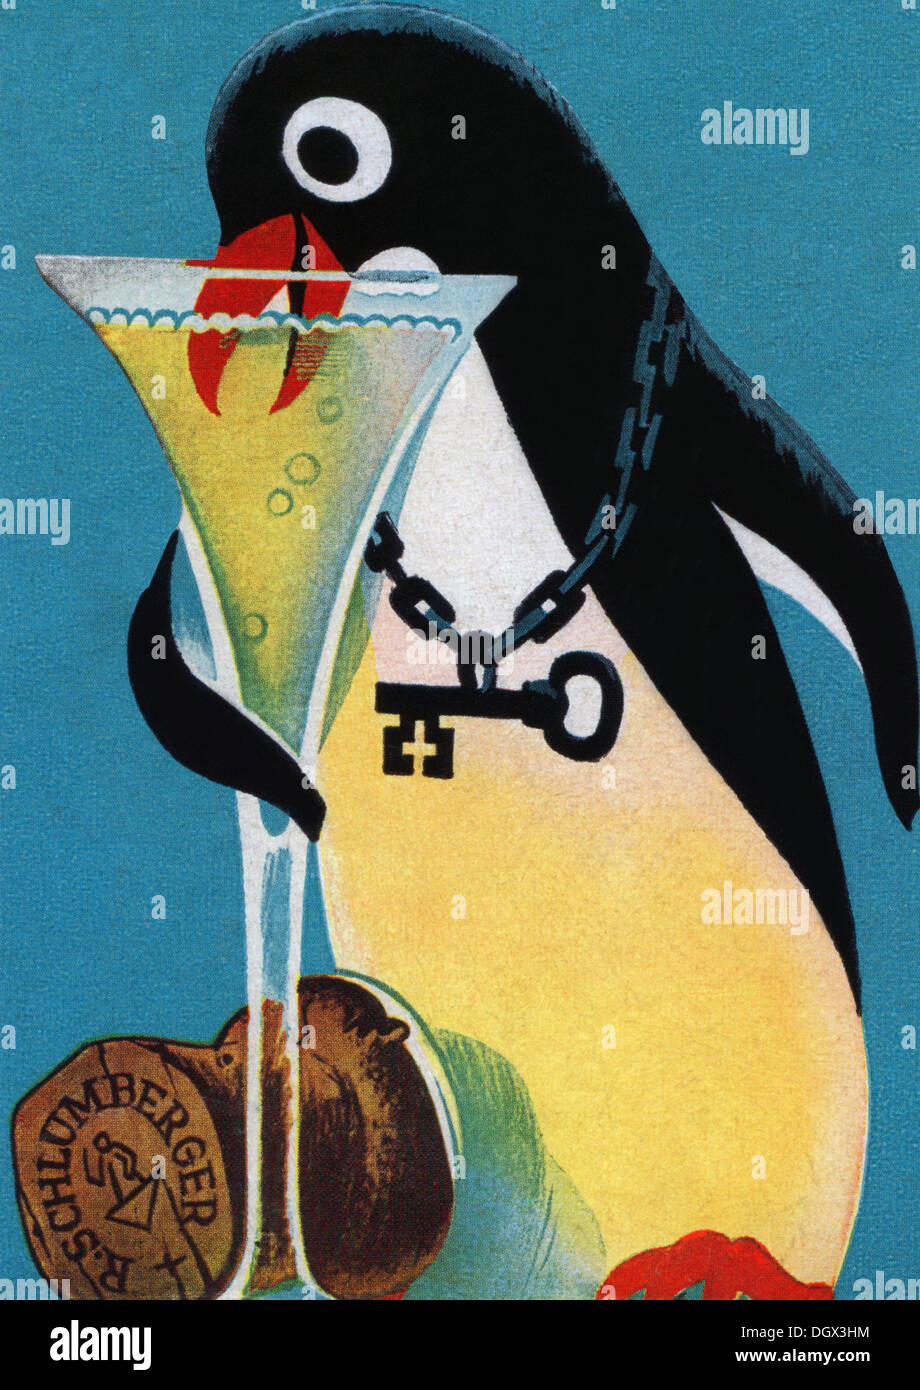 Alcohol ad - a vintage poster, 1920's - Editorial use only. Stock Photo